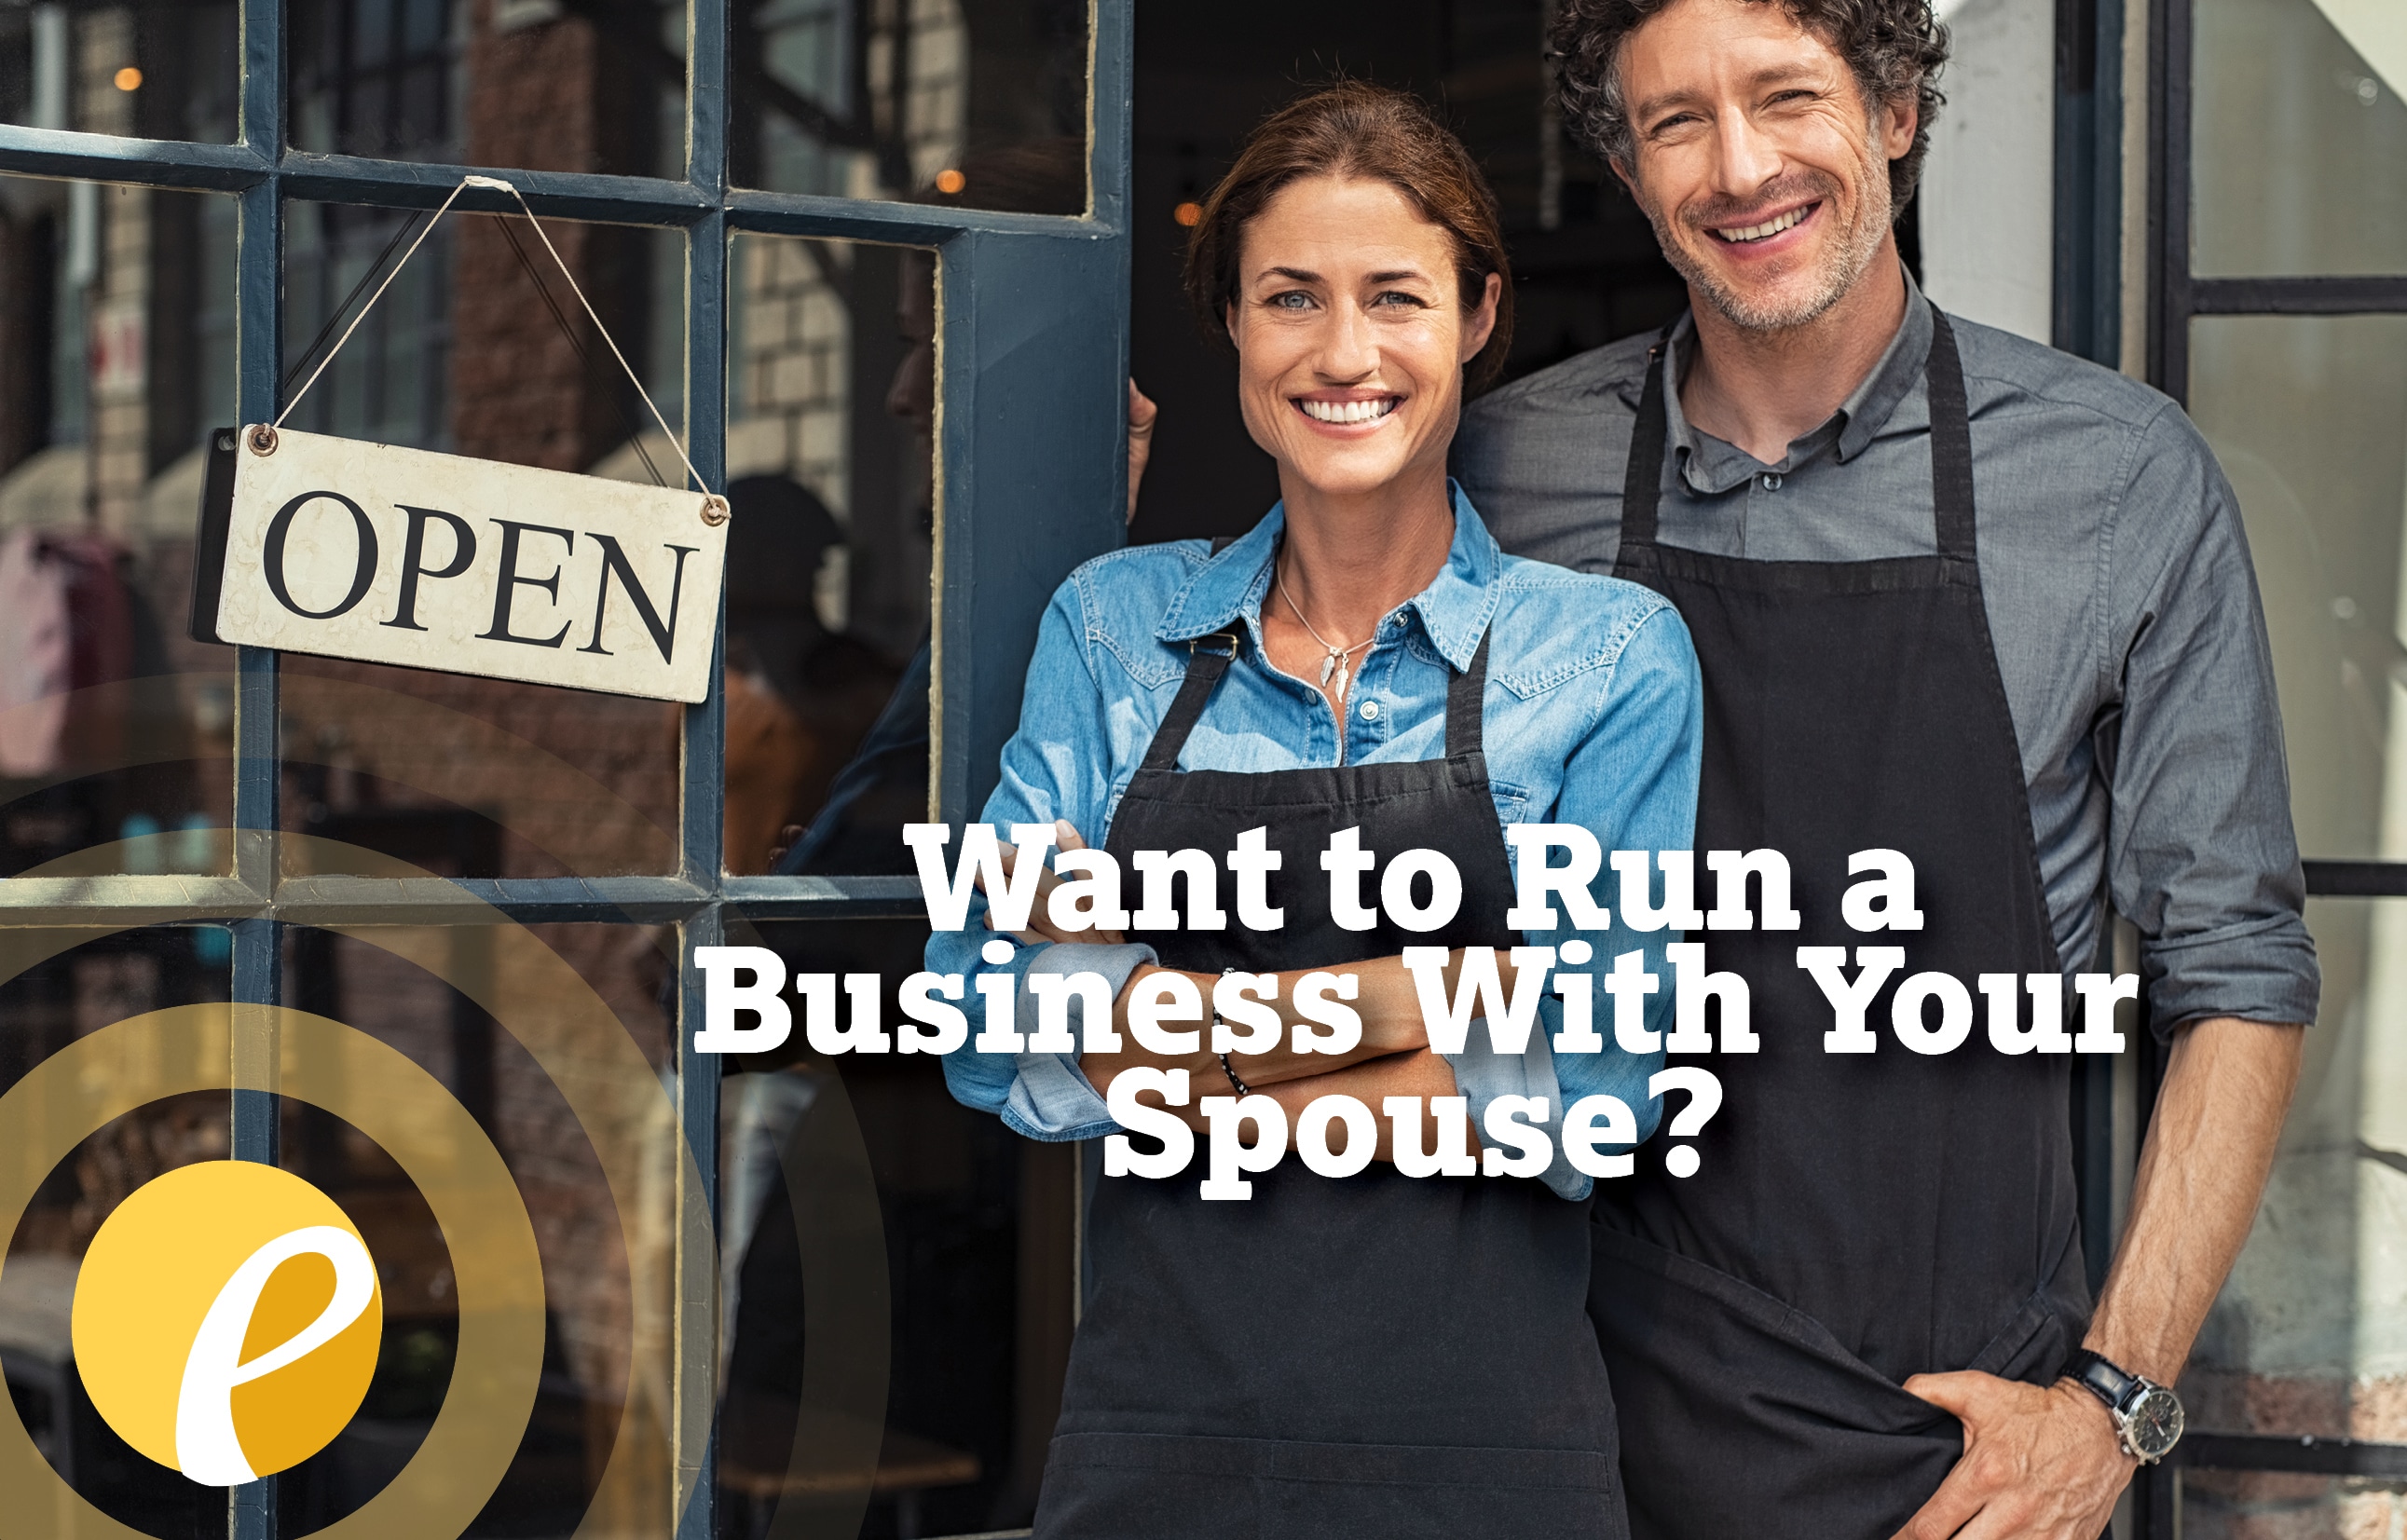 photo of smiling woman and man with Want to Run a Business with Your Spouse text